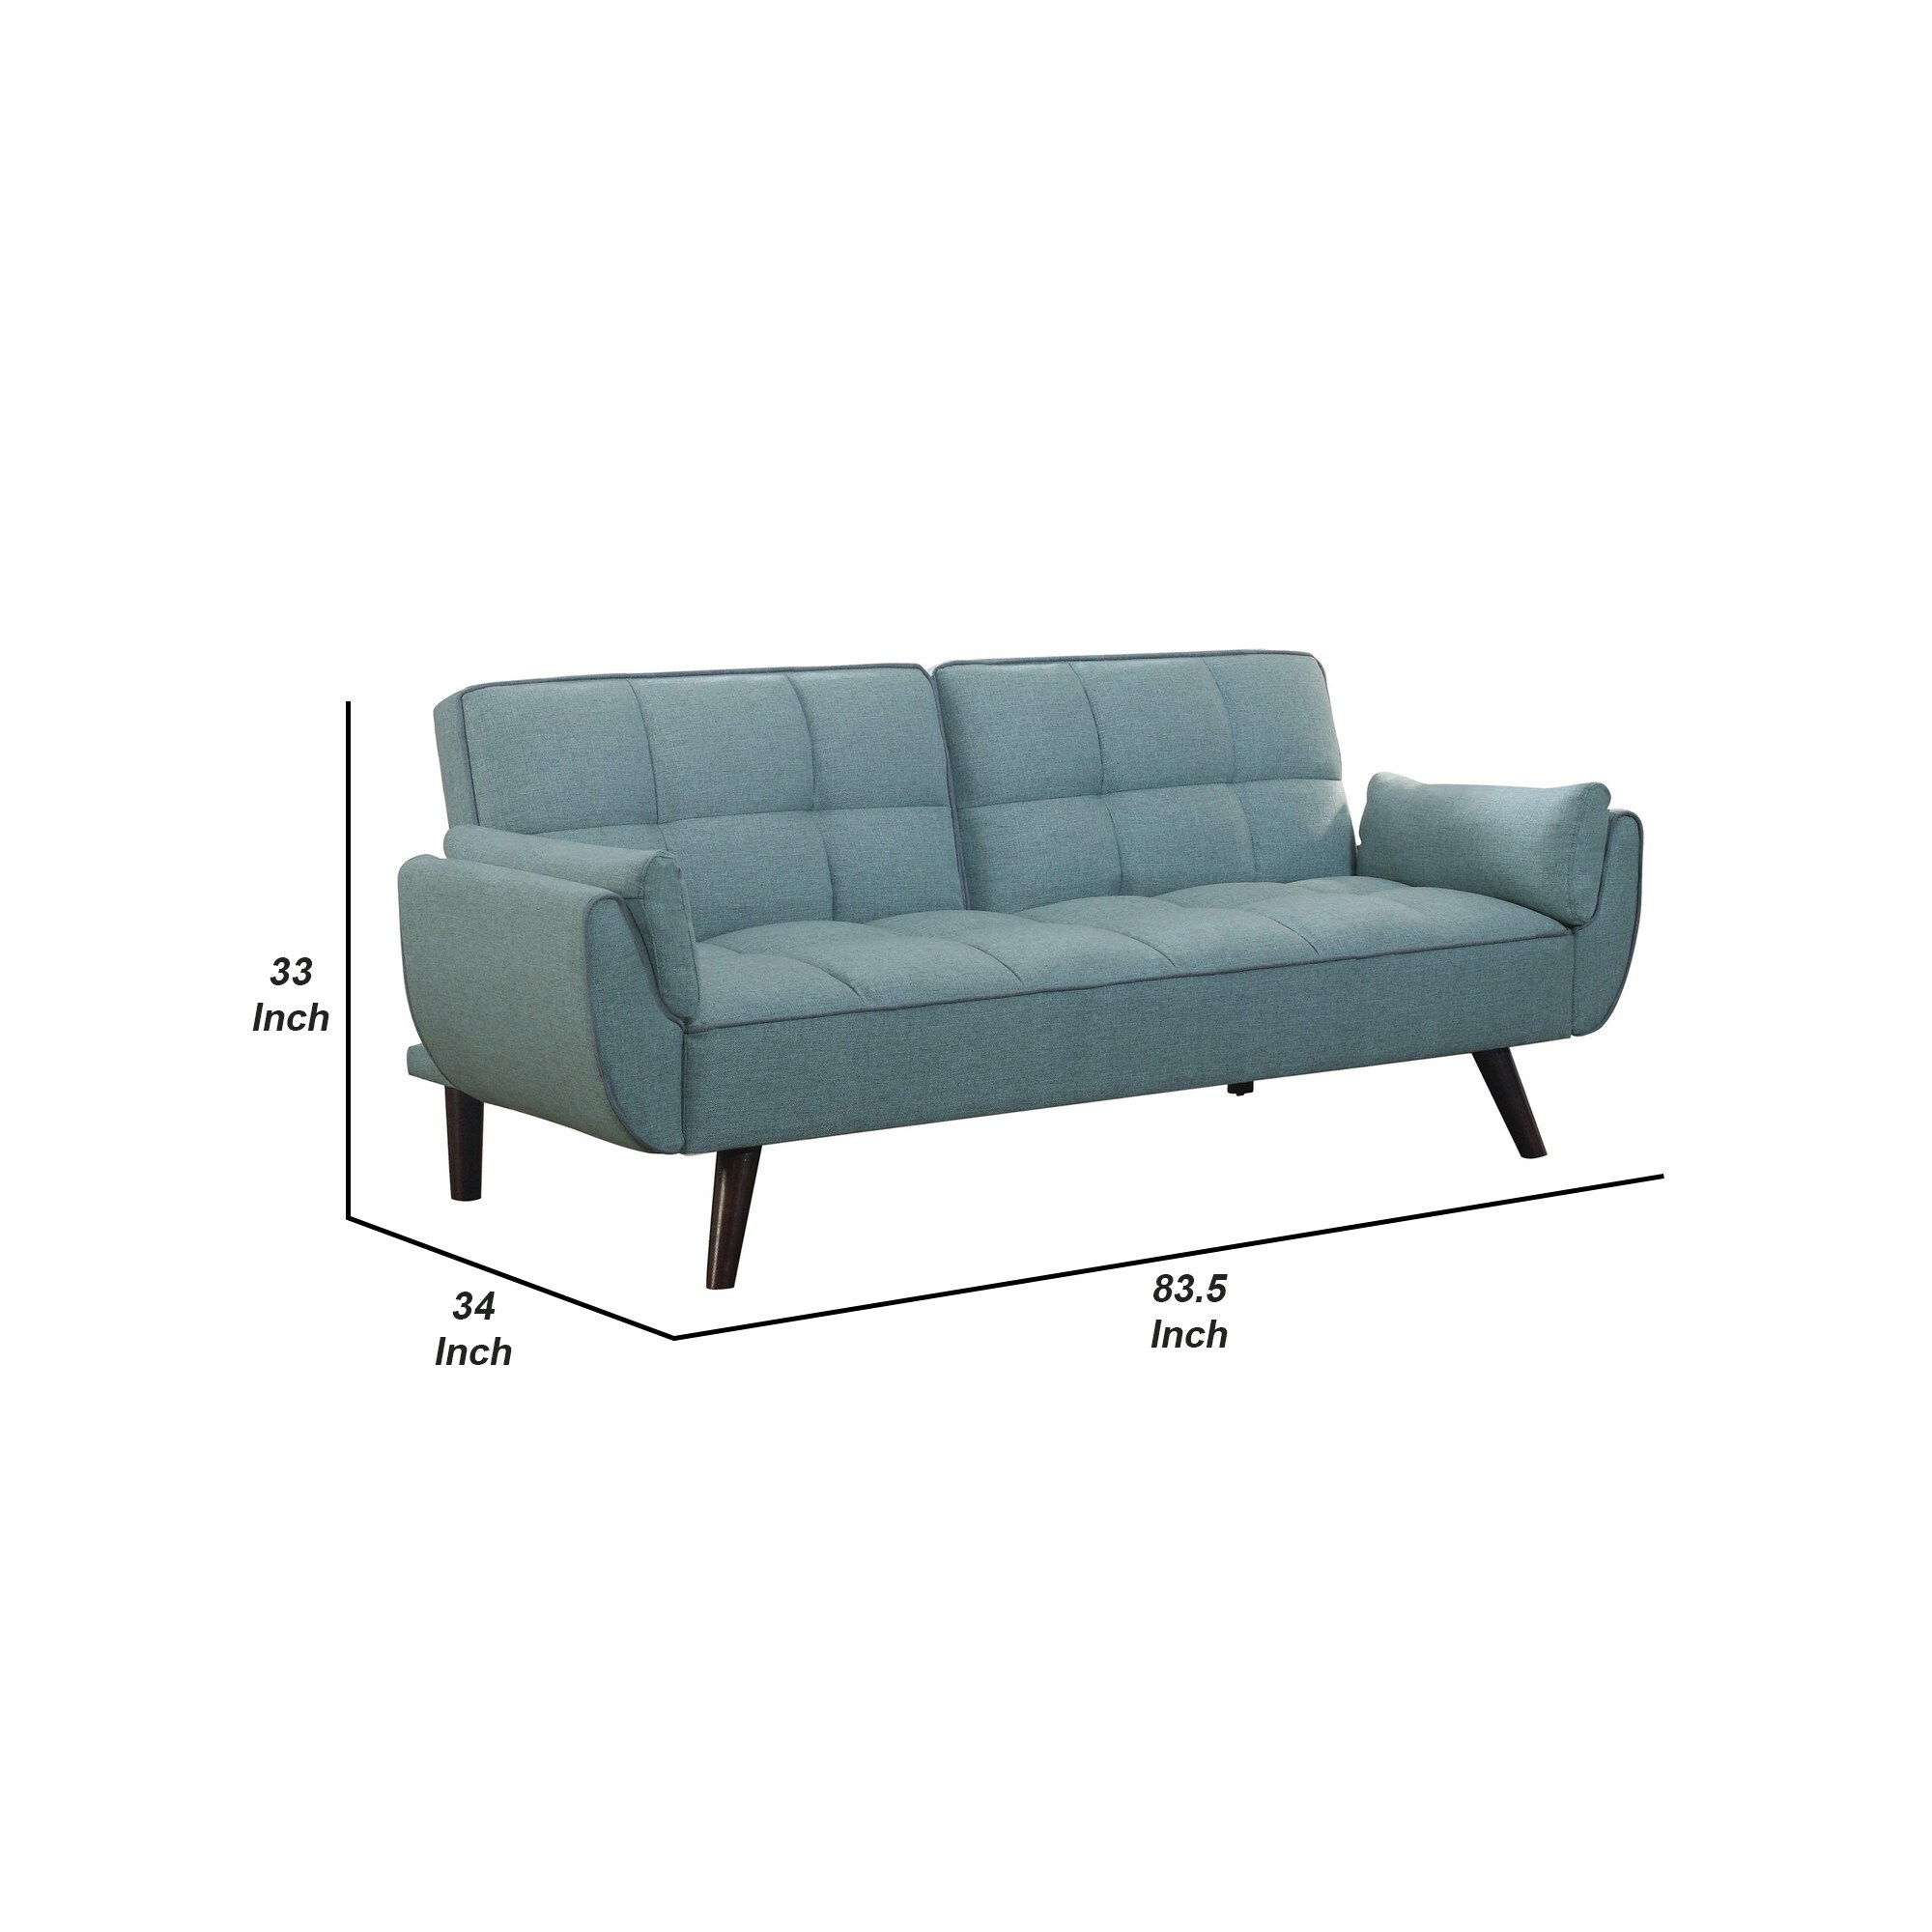 Tufted Stitching Fabric Sofa Bed with Splayed Legs, Blue